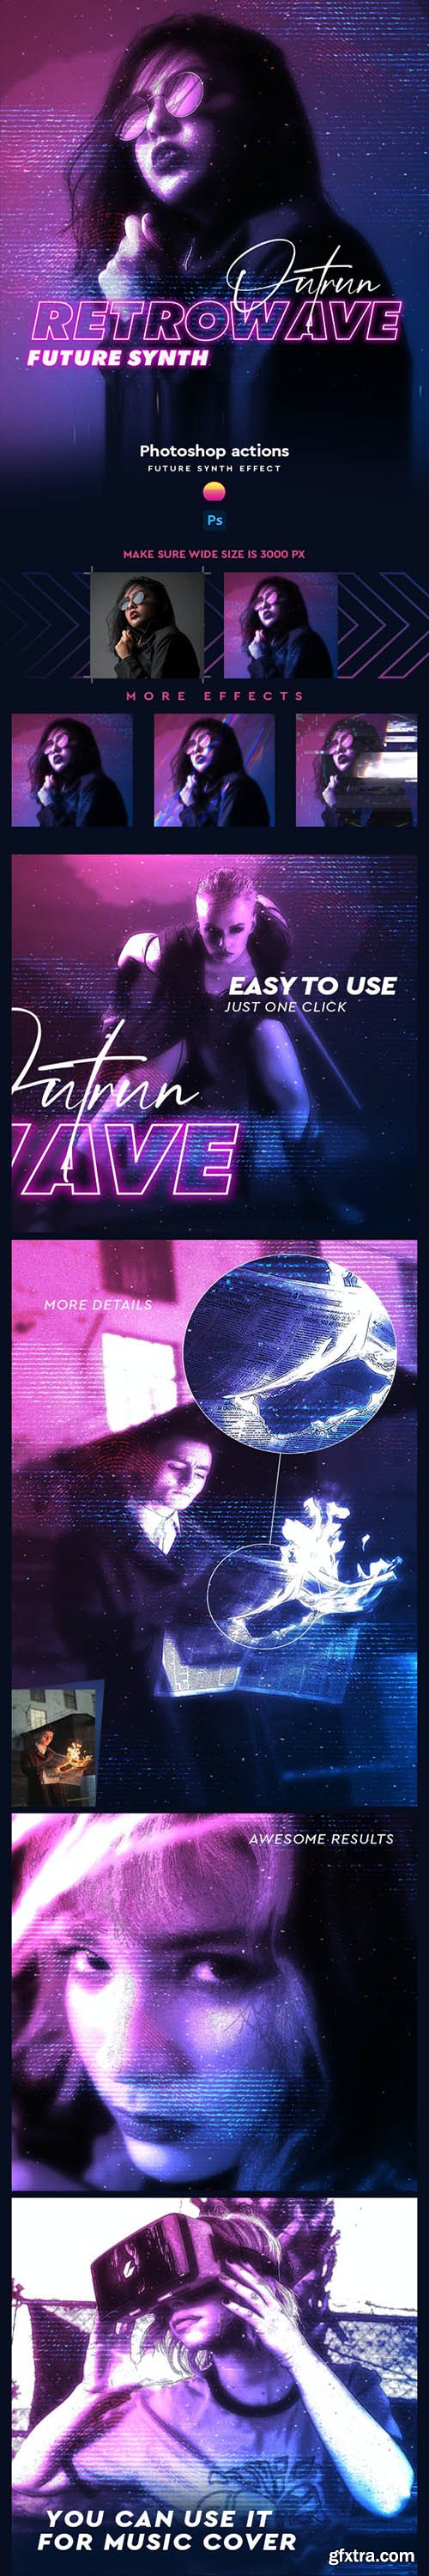 GraphicRiver - RETROWAVE | future synth effect PS Action 28916818